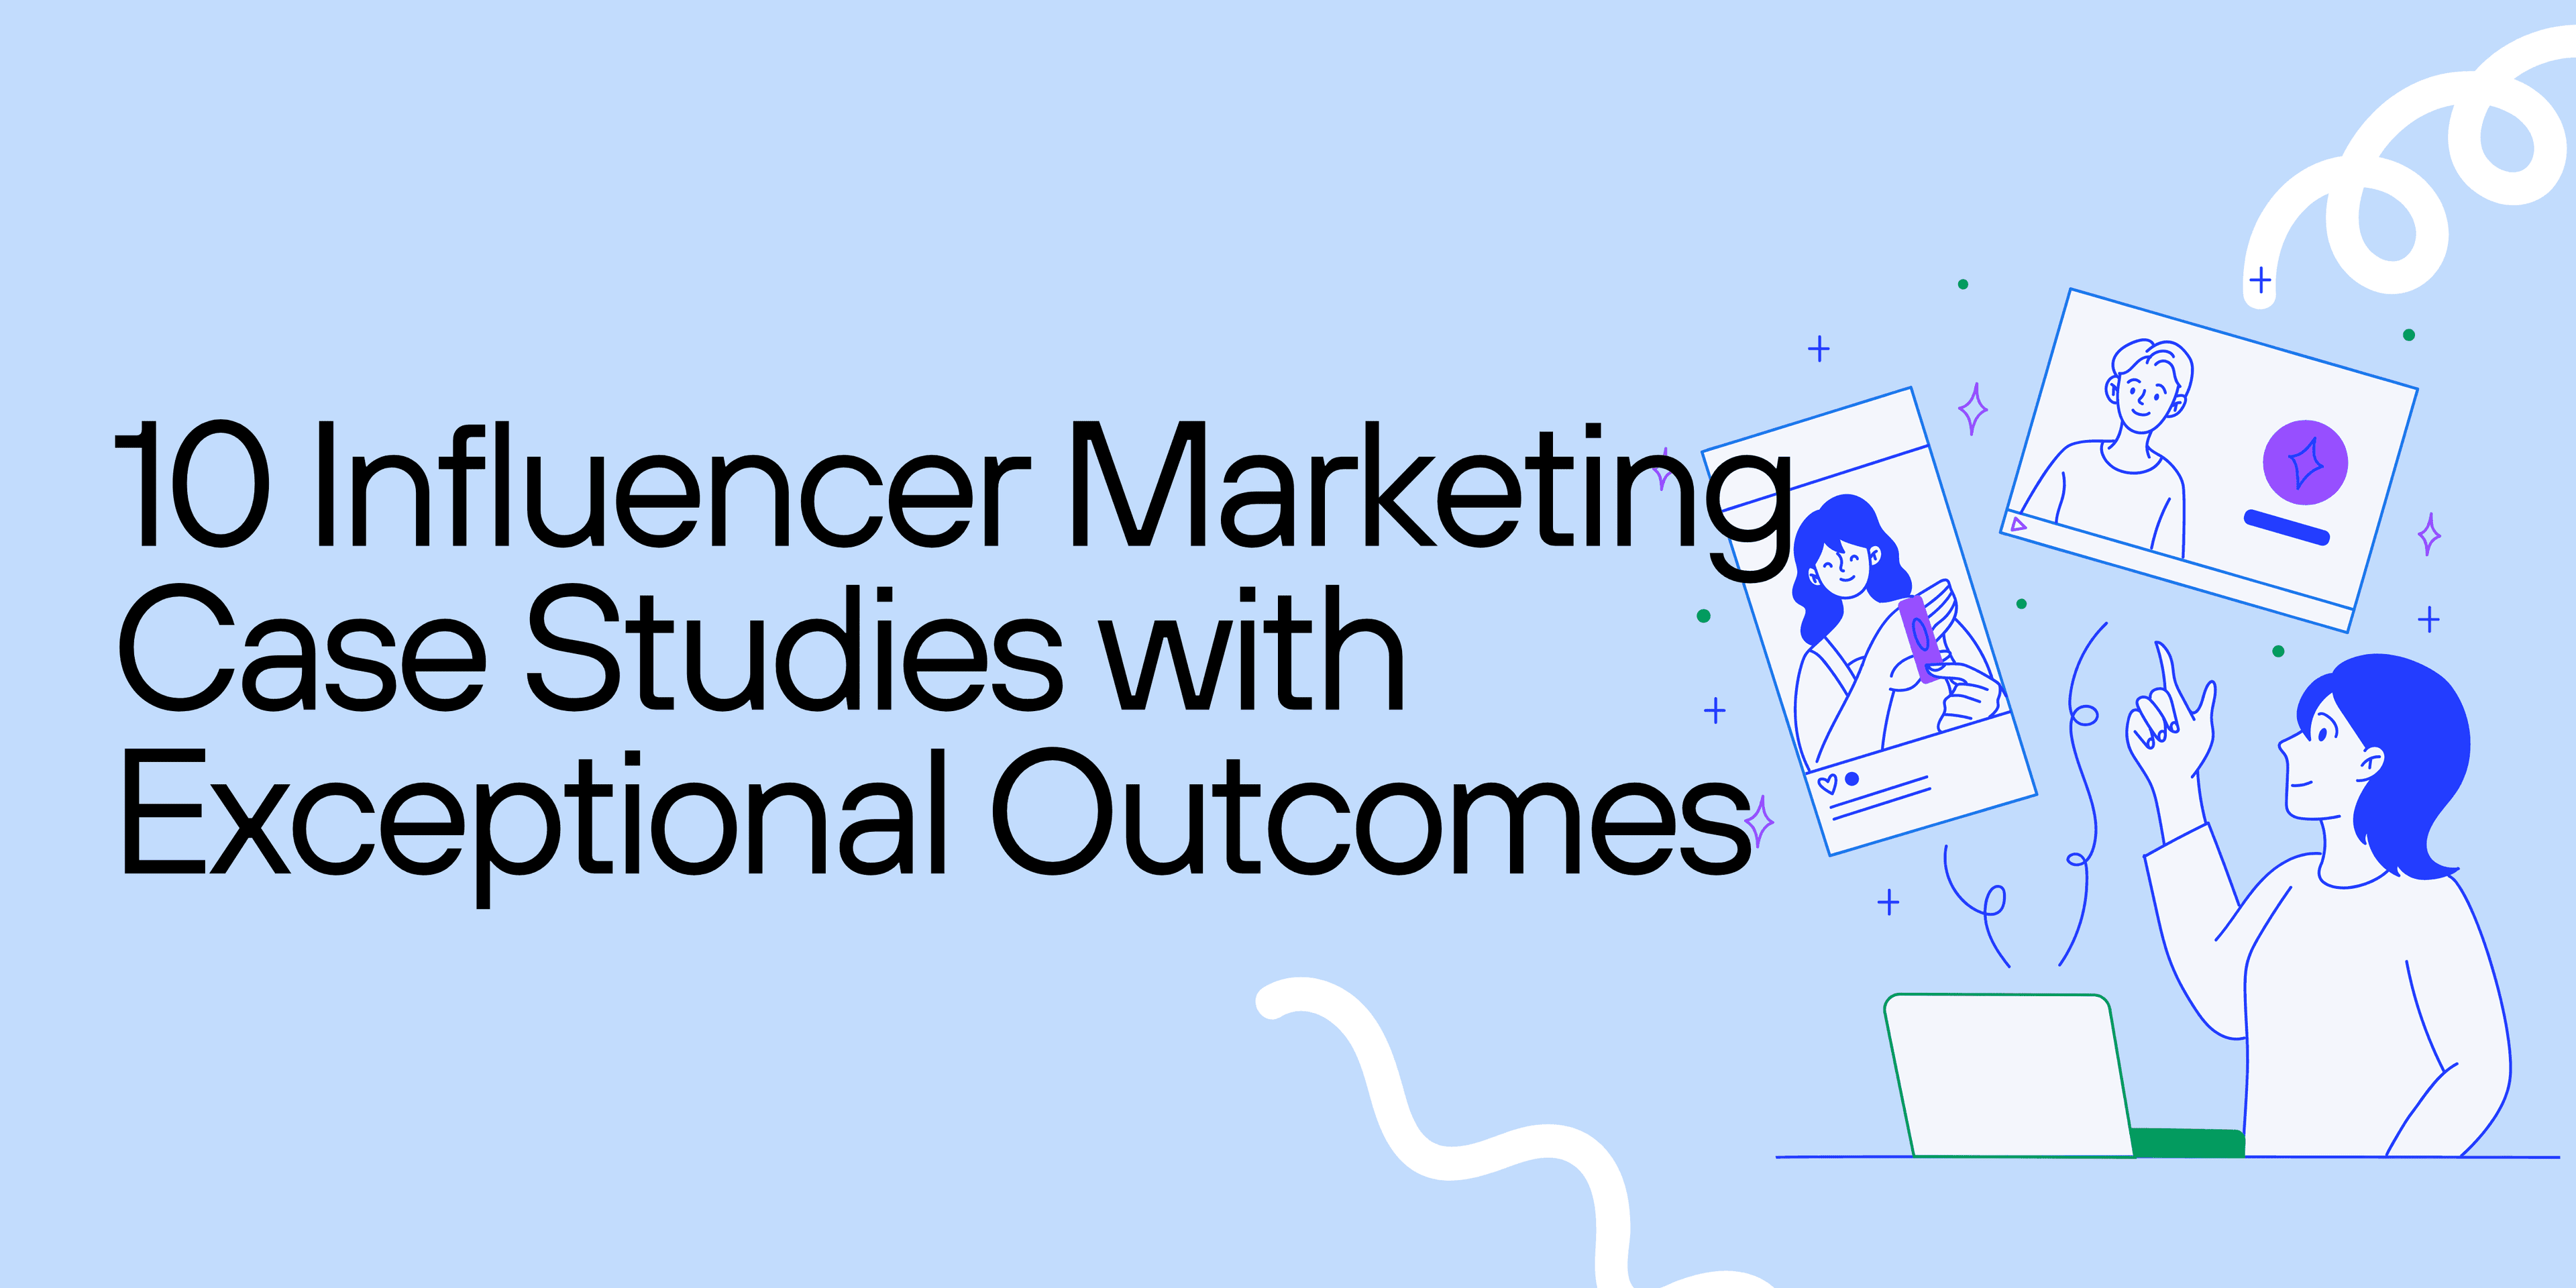 10 Influencer Marketing Case Studies with Exceptional Outcomes image